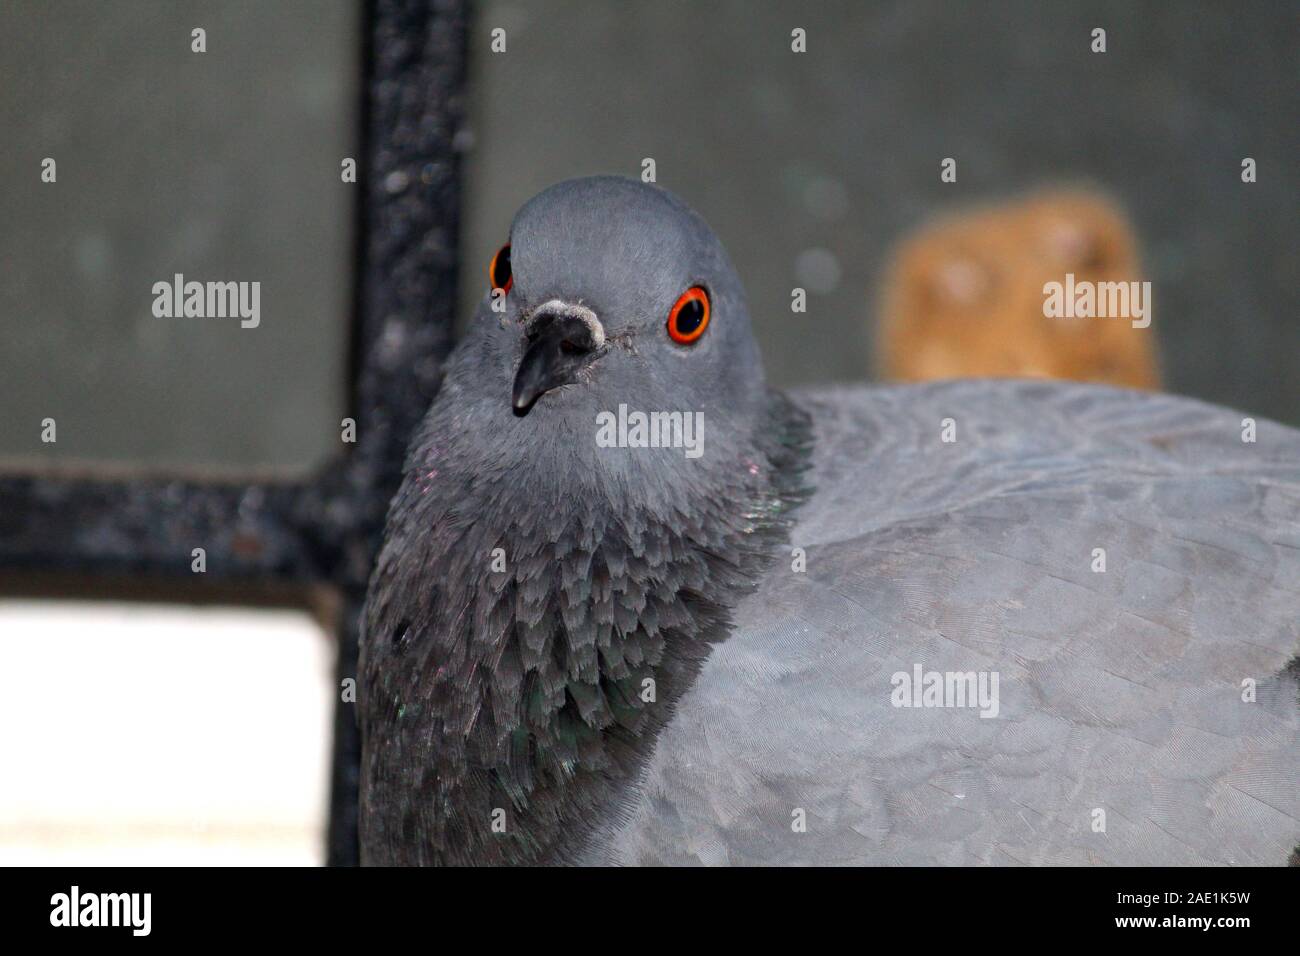 Close-up image of a Pigeon Stock Photo